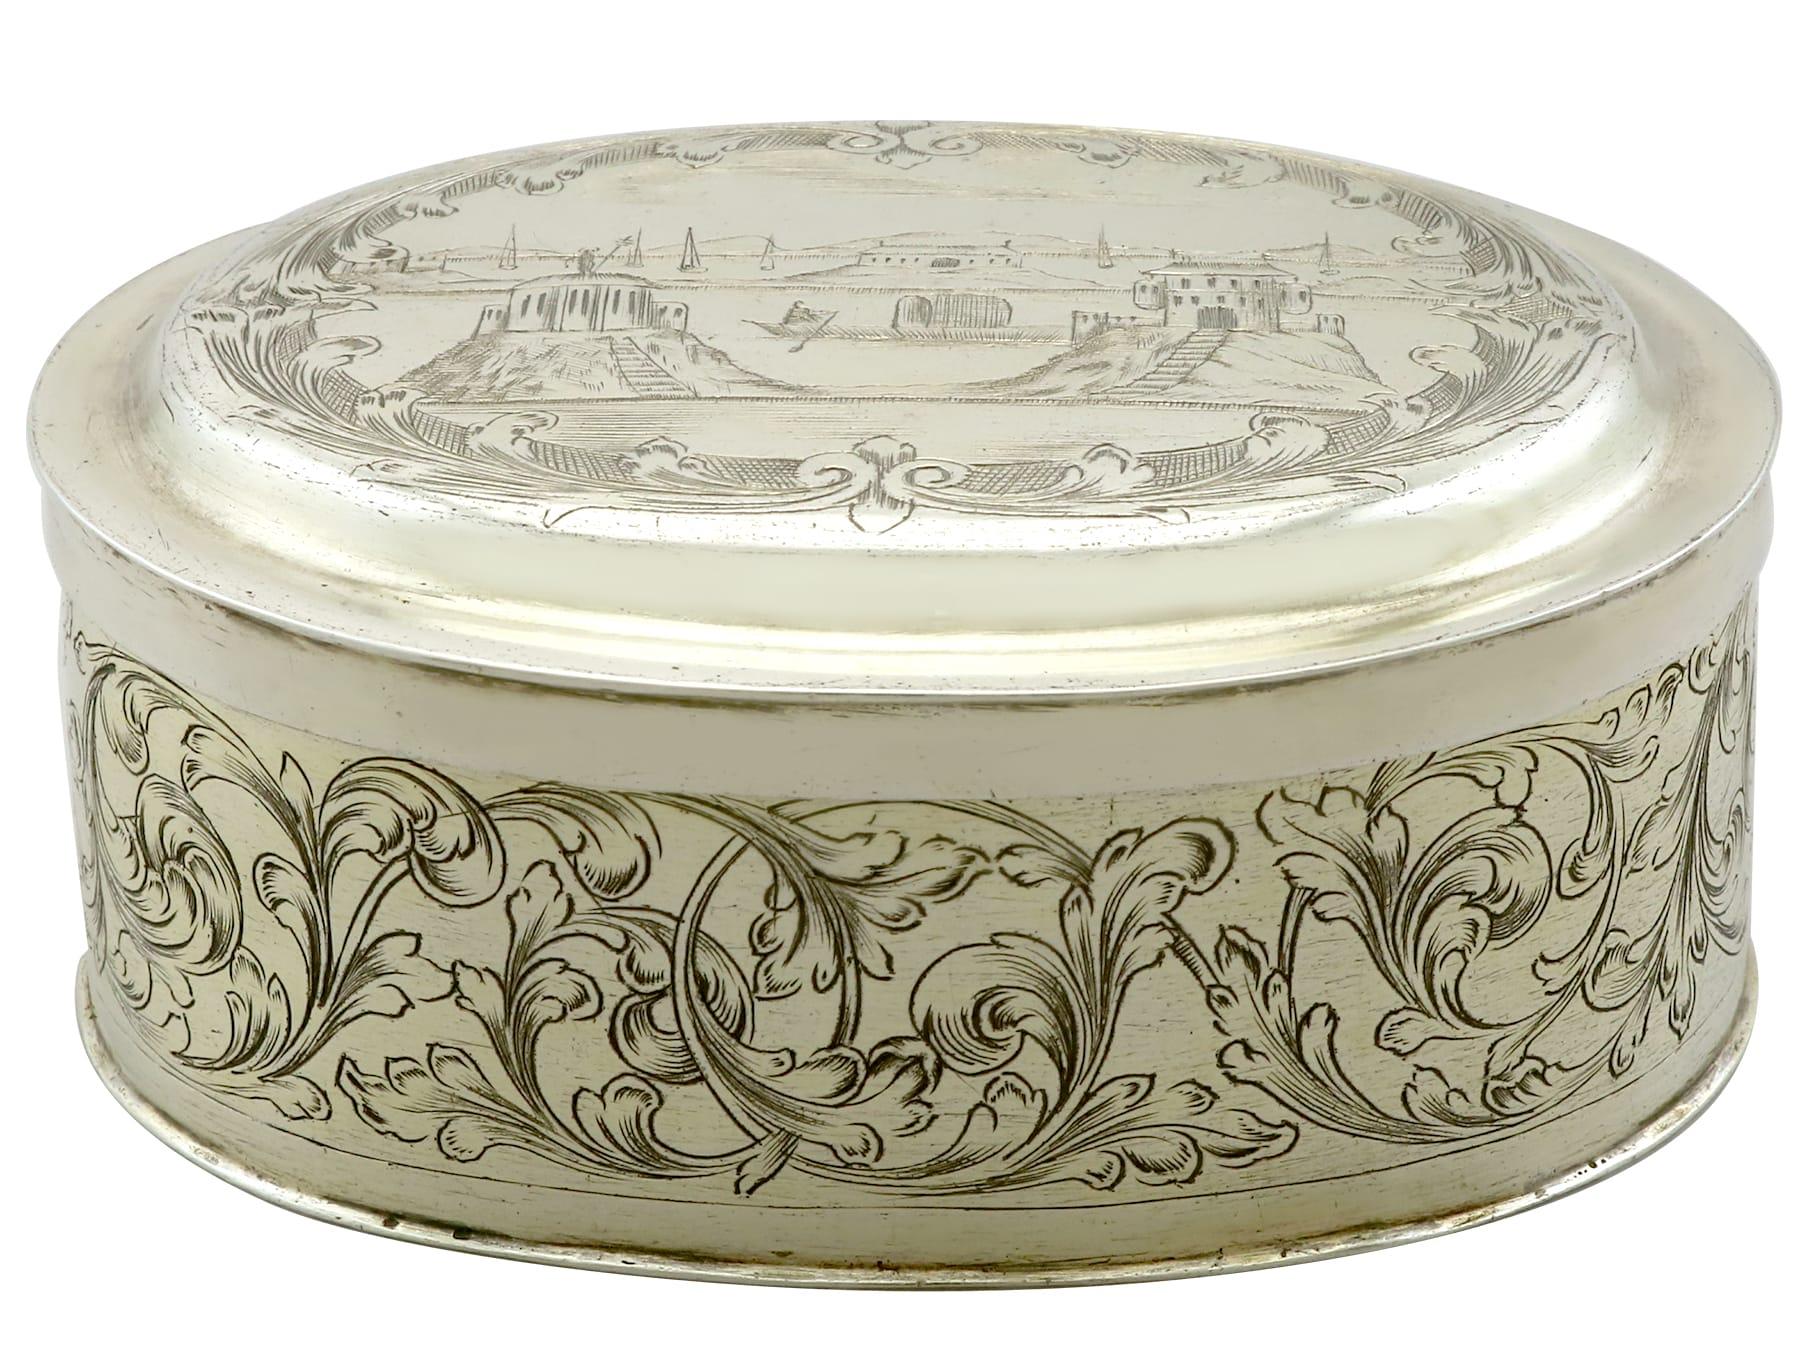 An exceptional, fine and impressive antique German silver gilt tobacco box; an addition to our 17th century silverware collection.

This exceptional antique 17th century German silver gilt tobacco box has an oval form.

The surface of this antique